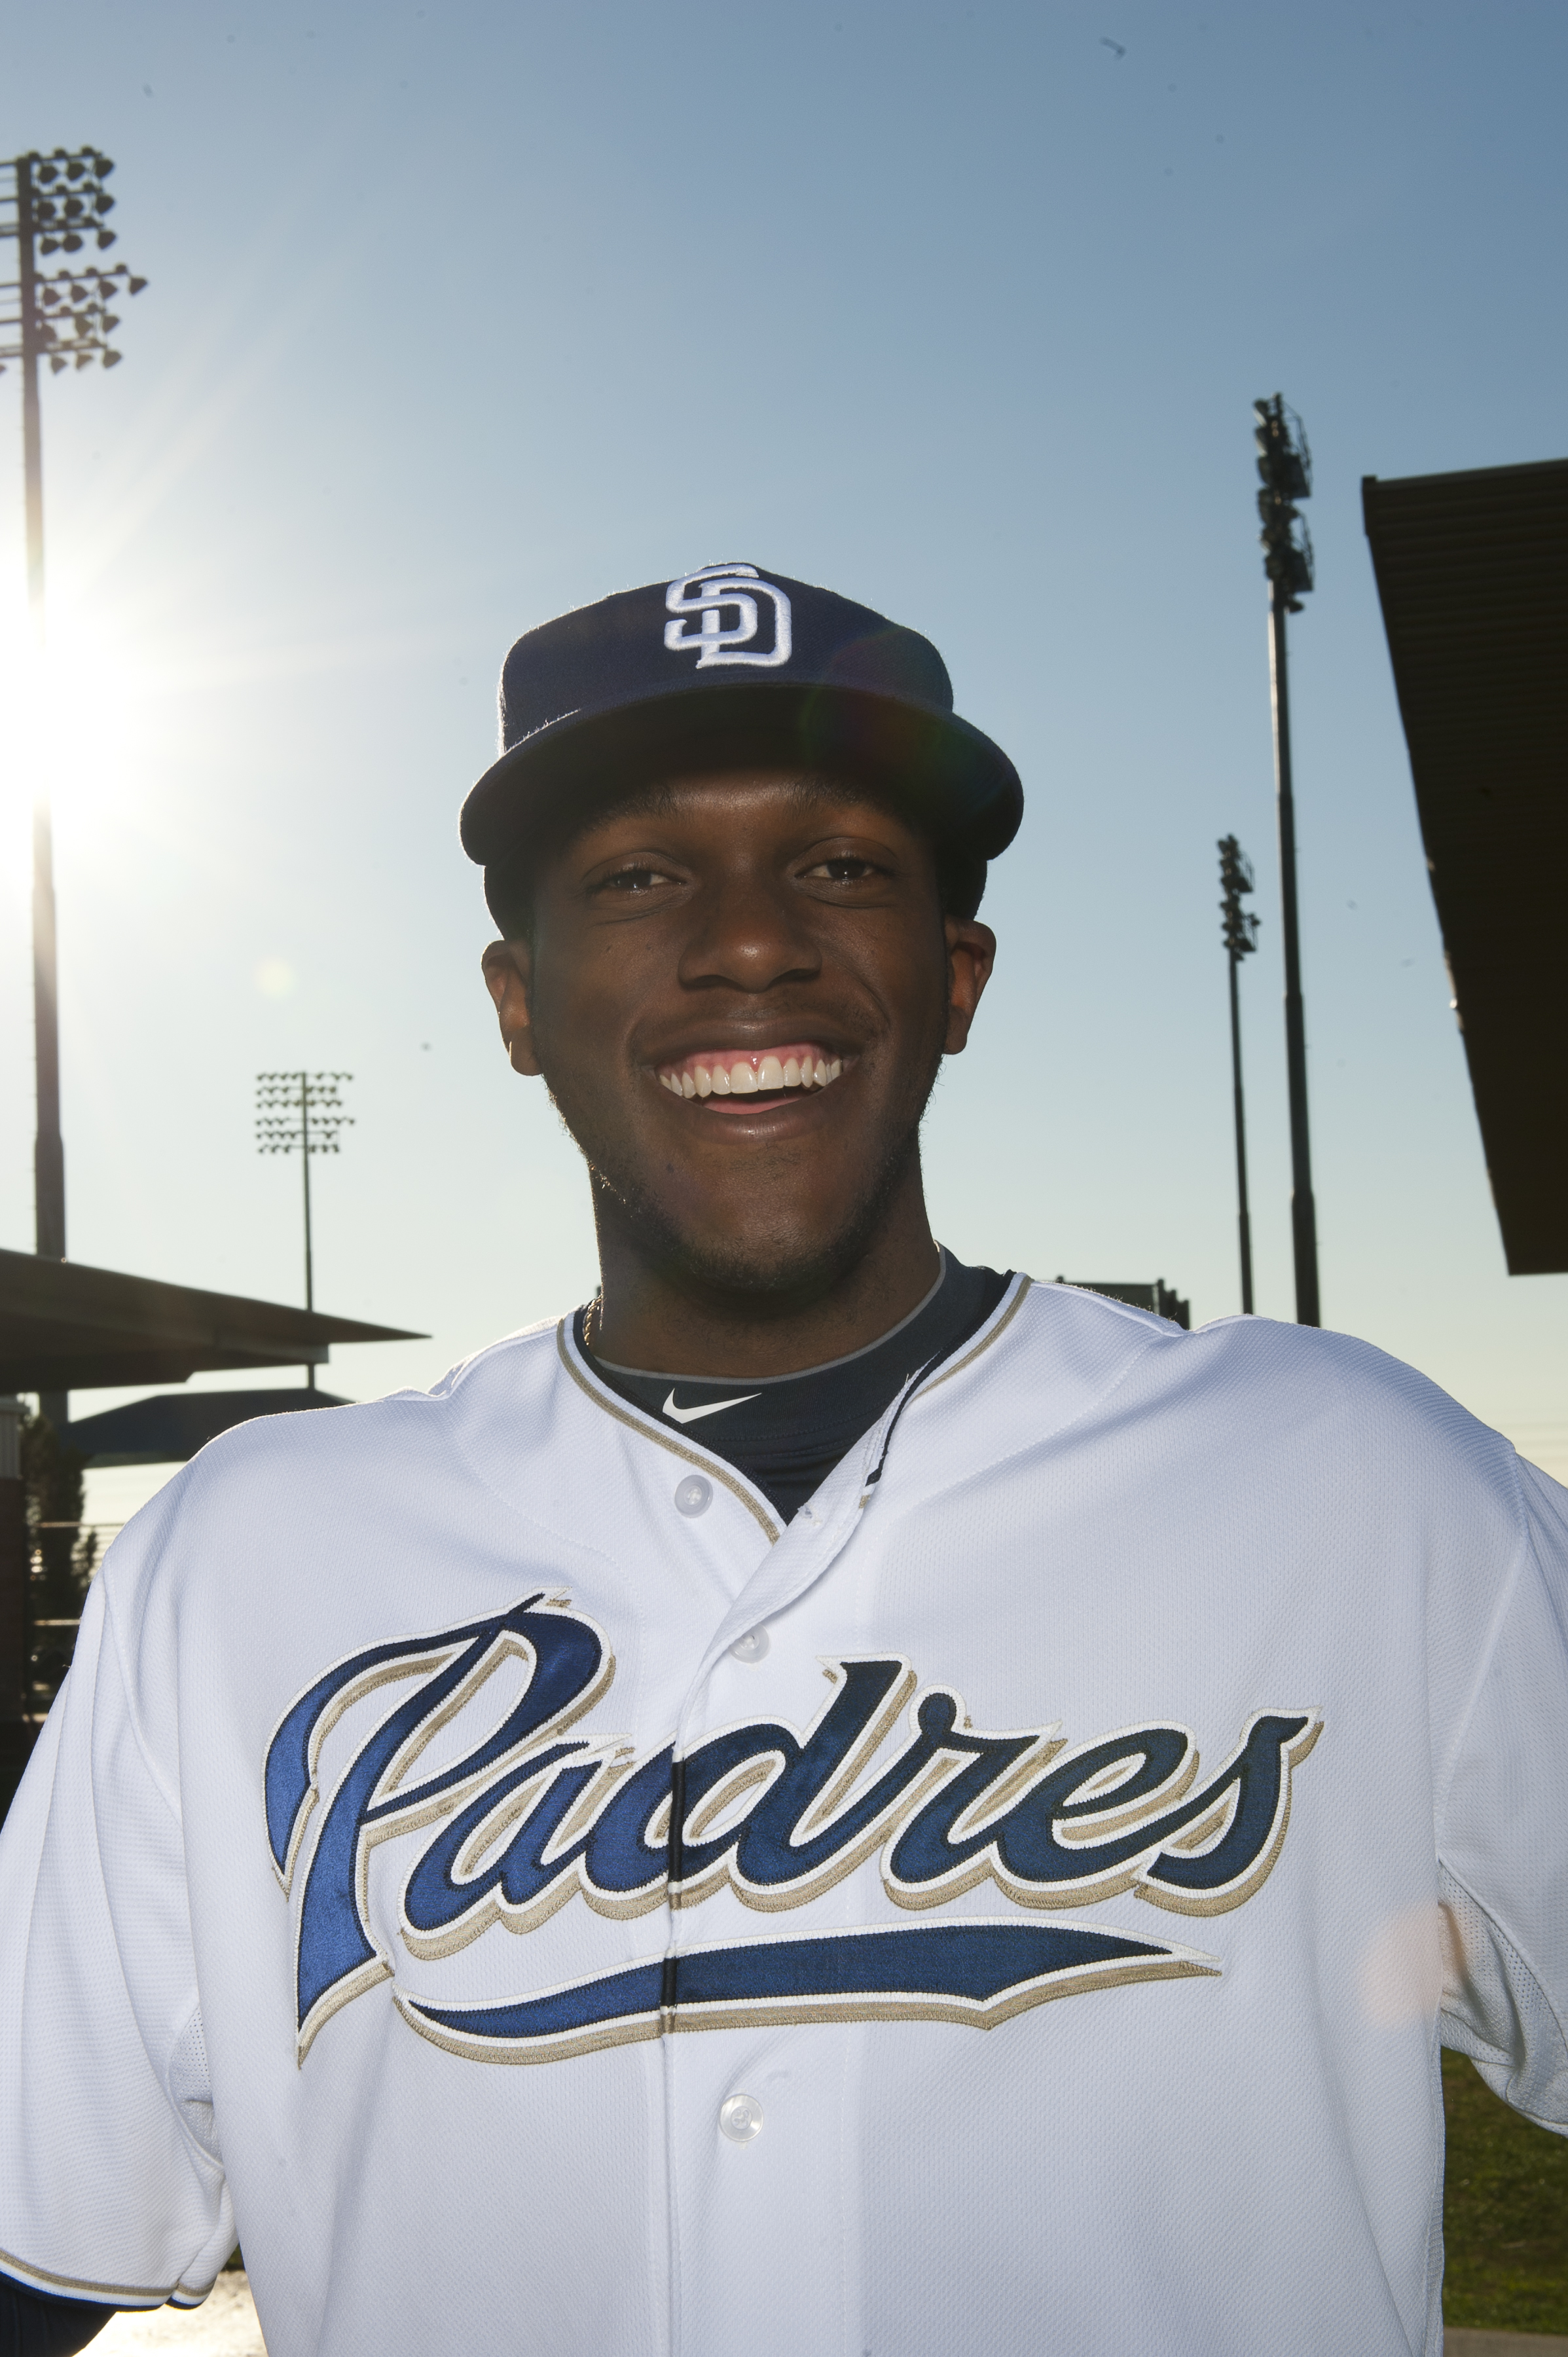 PEORIA, AZ - FEBRUARY 23: Cameron Maybin #24 of the San Diego Padres poses during their photo day at the Padres Spring Training Complex on February 23, 2011 in Peoria, Arizona. (Photo by Rob Tringali/Getty Images)